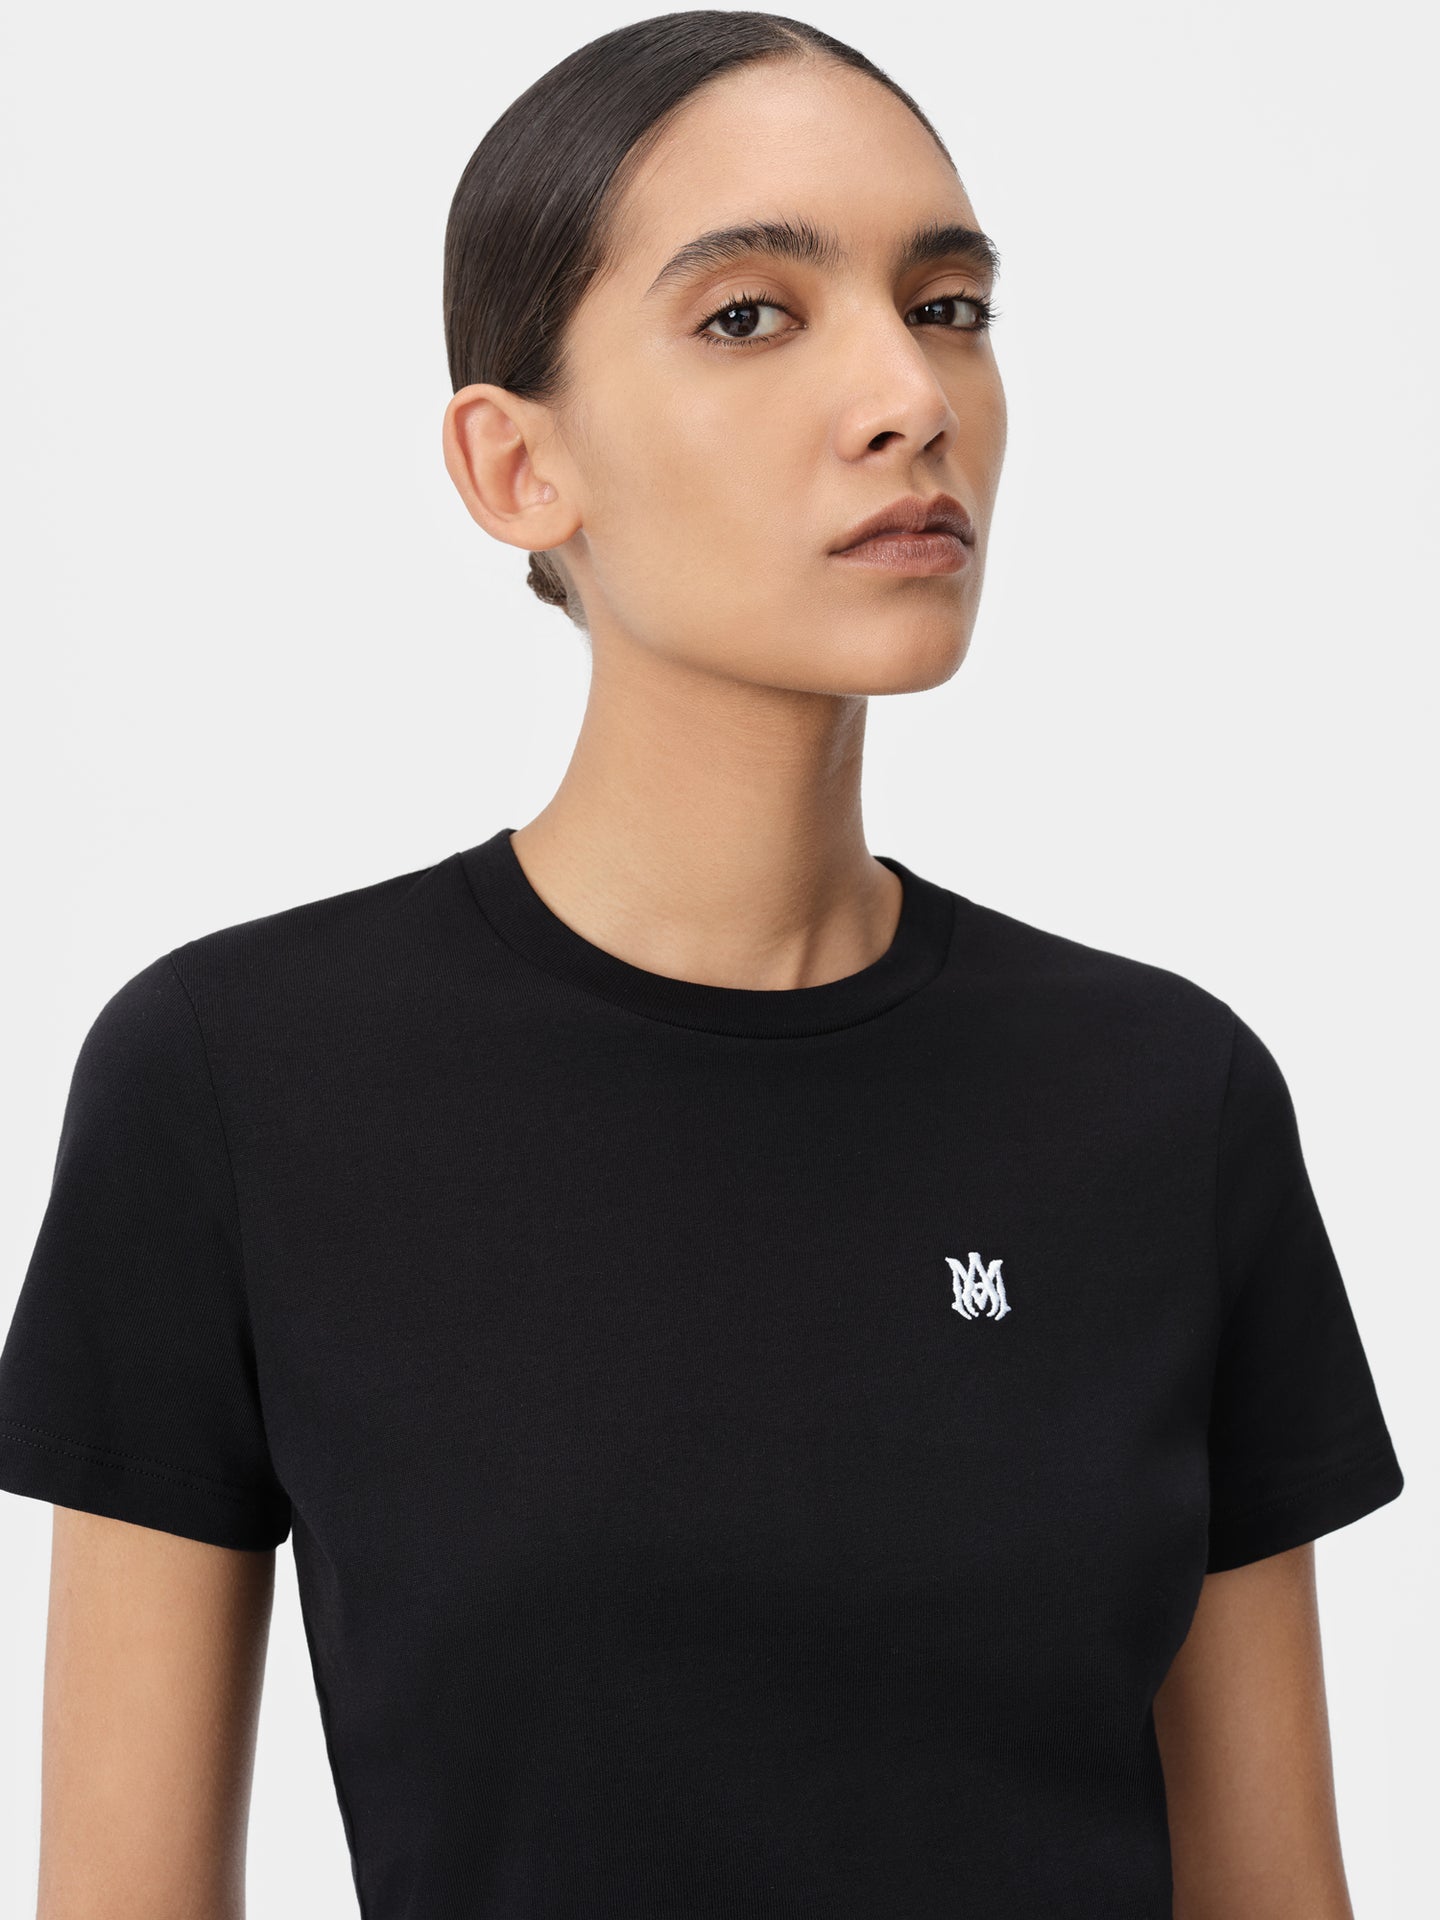 WOMEN - WOMEN'S MA EMBROIDERED BABY TEE - Black